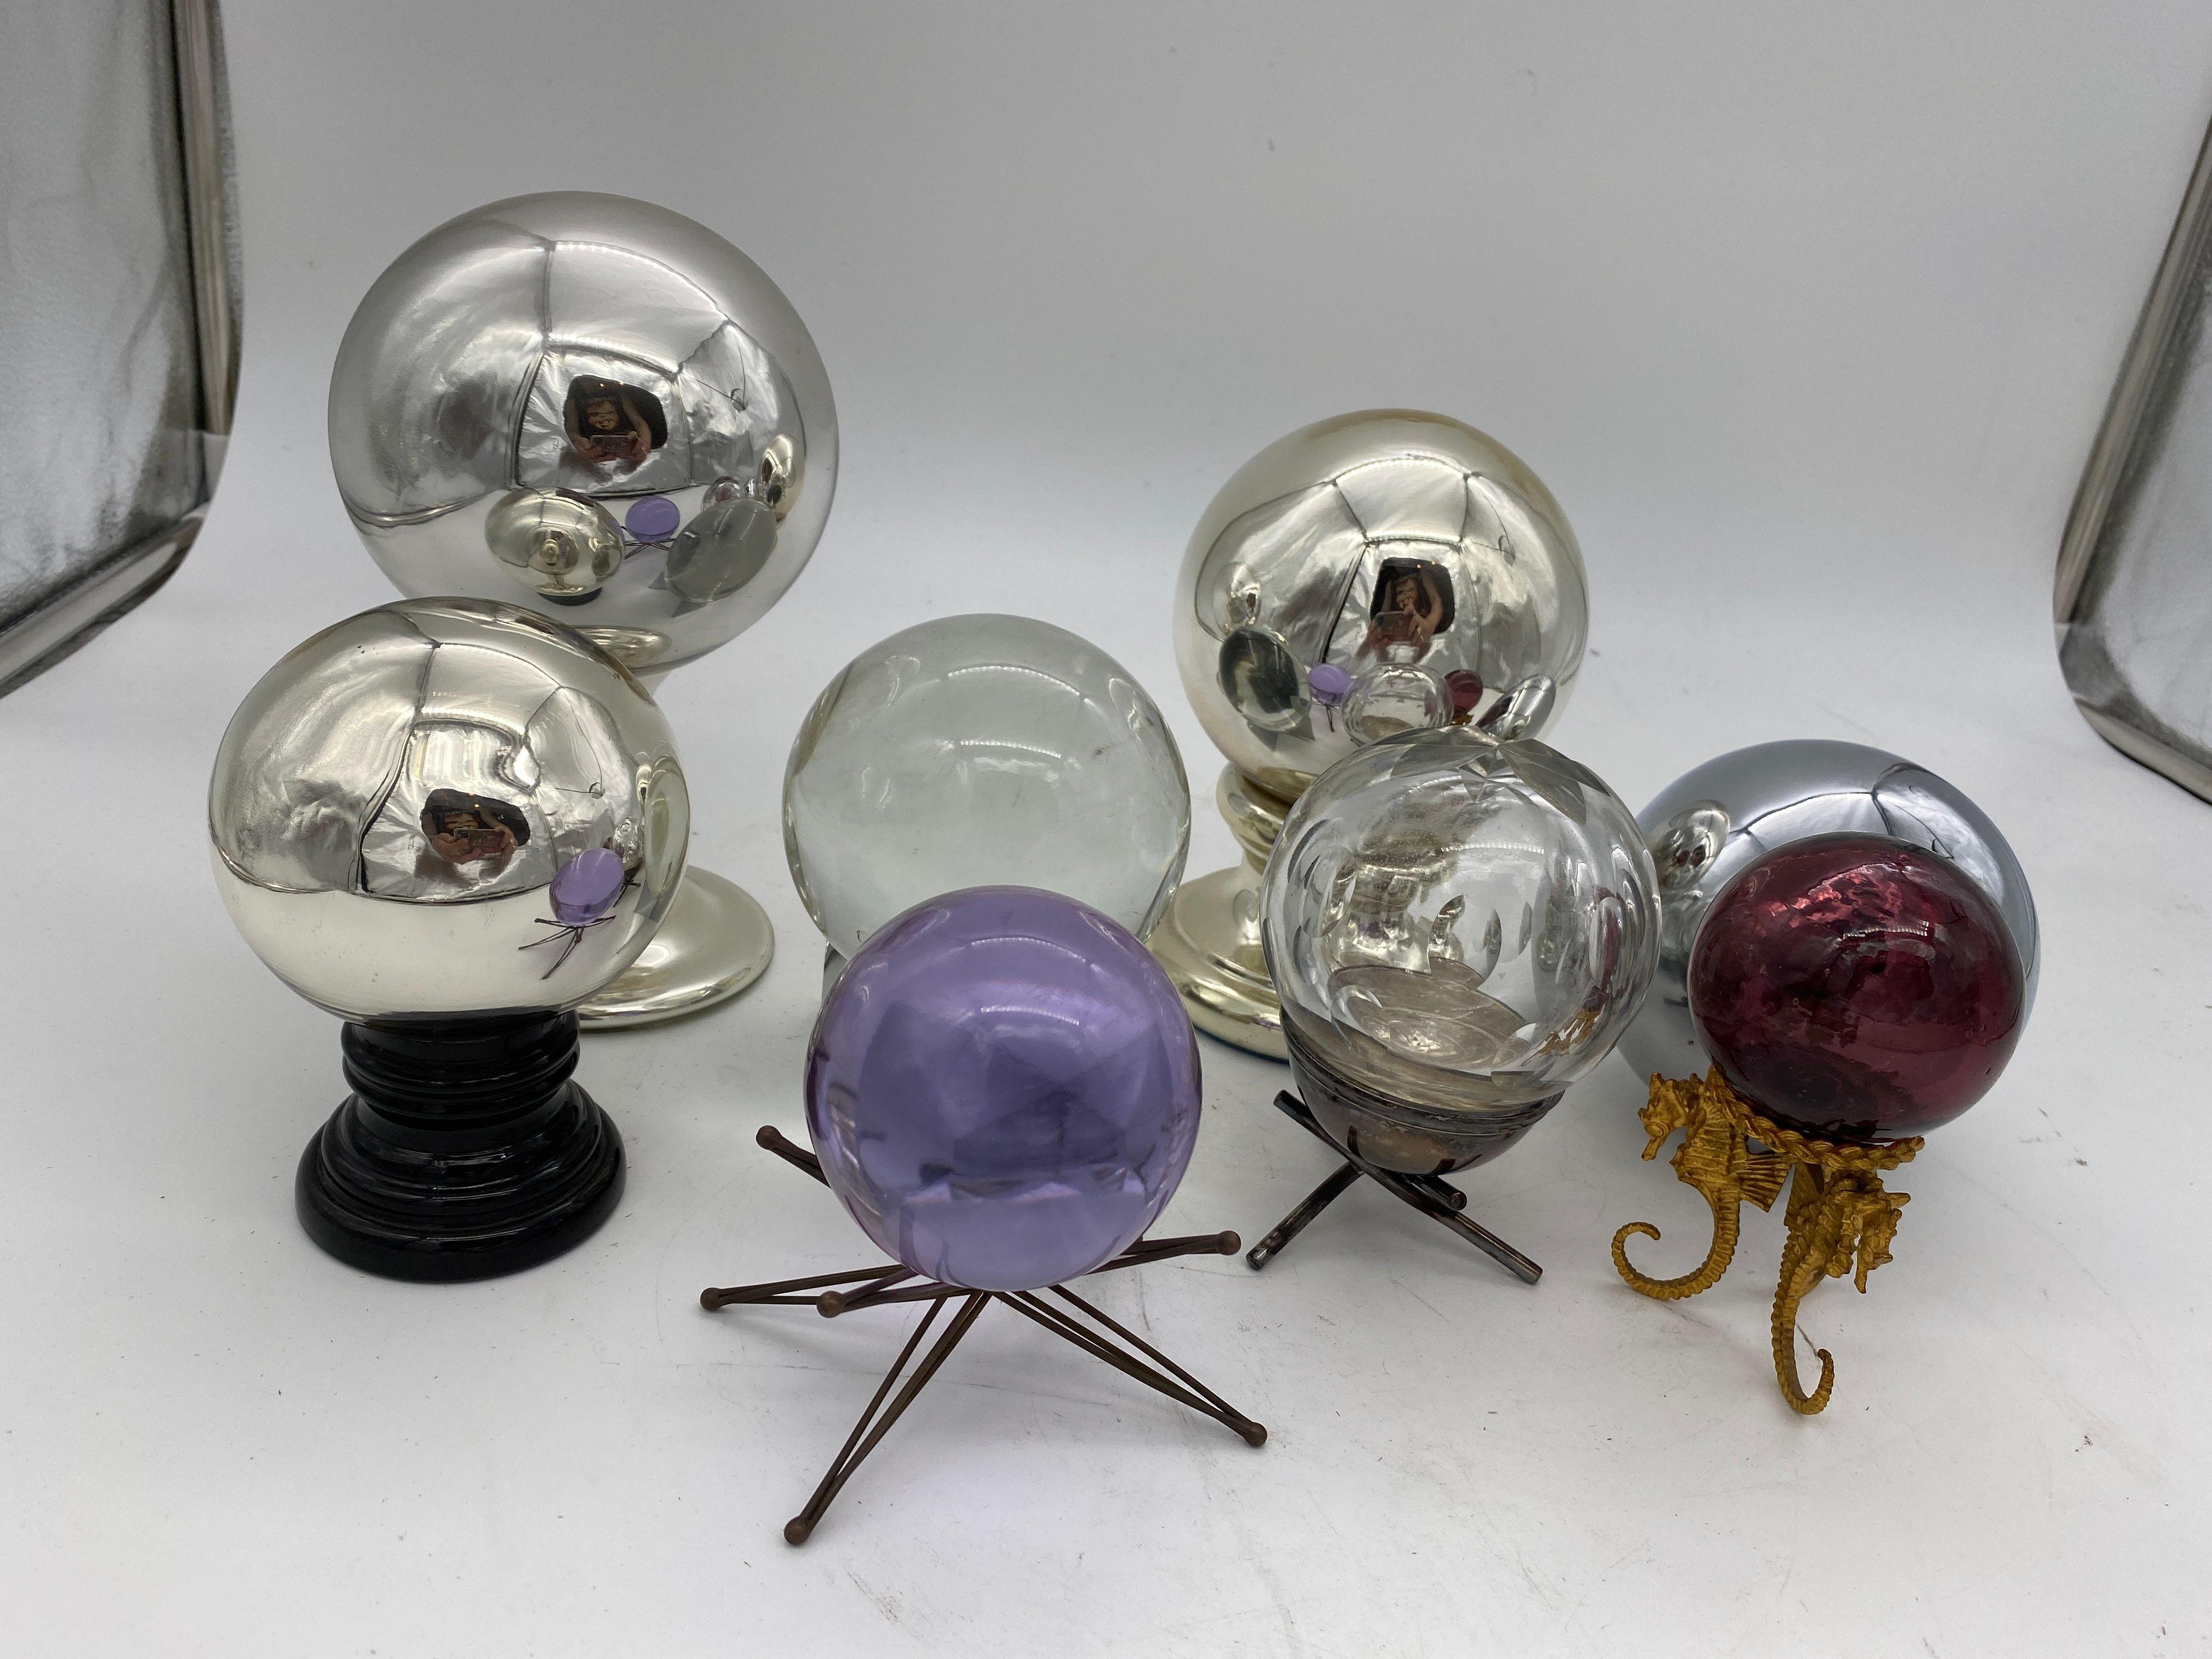 Collection of 7 spheres featuring 2 in mercury glass and 5 glass. Six come with bases.

The largest is 3